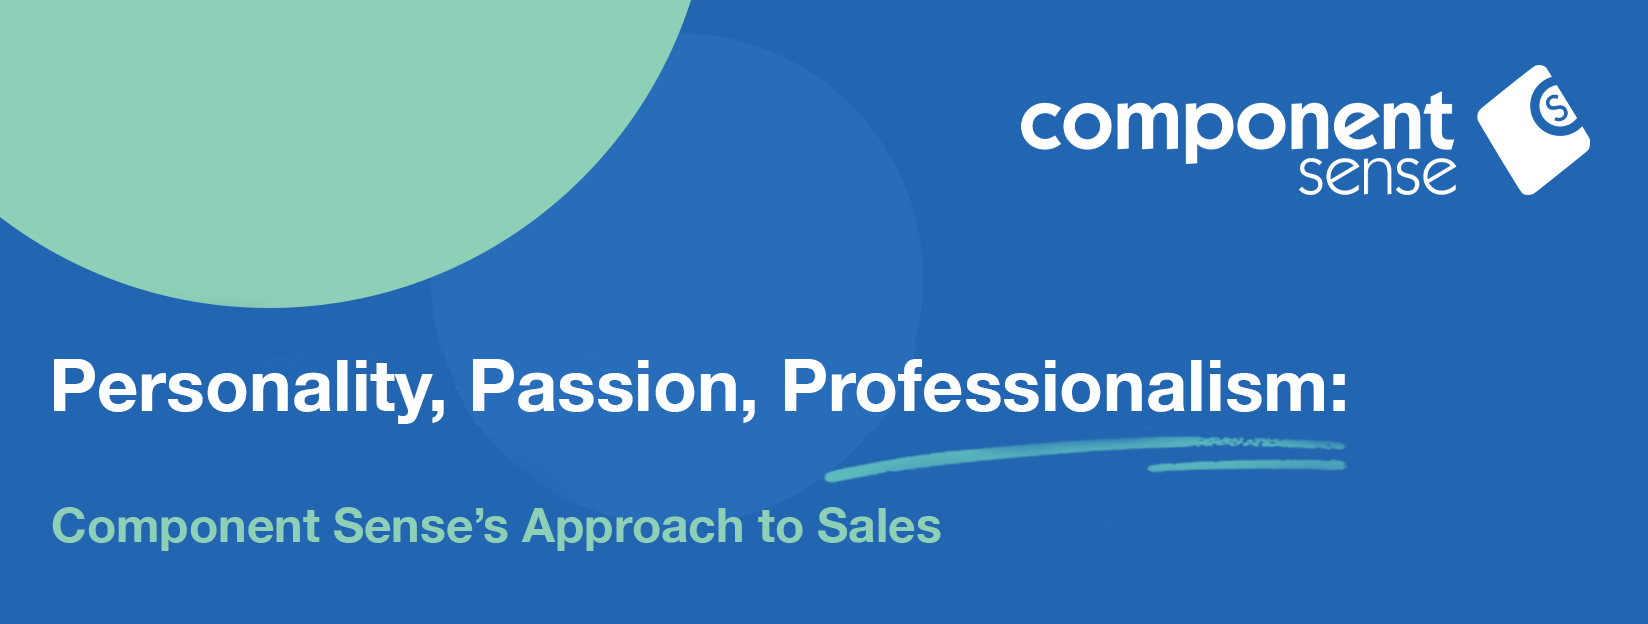 Personality, Passion, Professionalism: Component Sense’s Approach to Sales